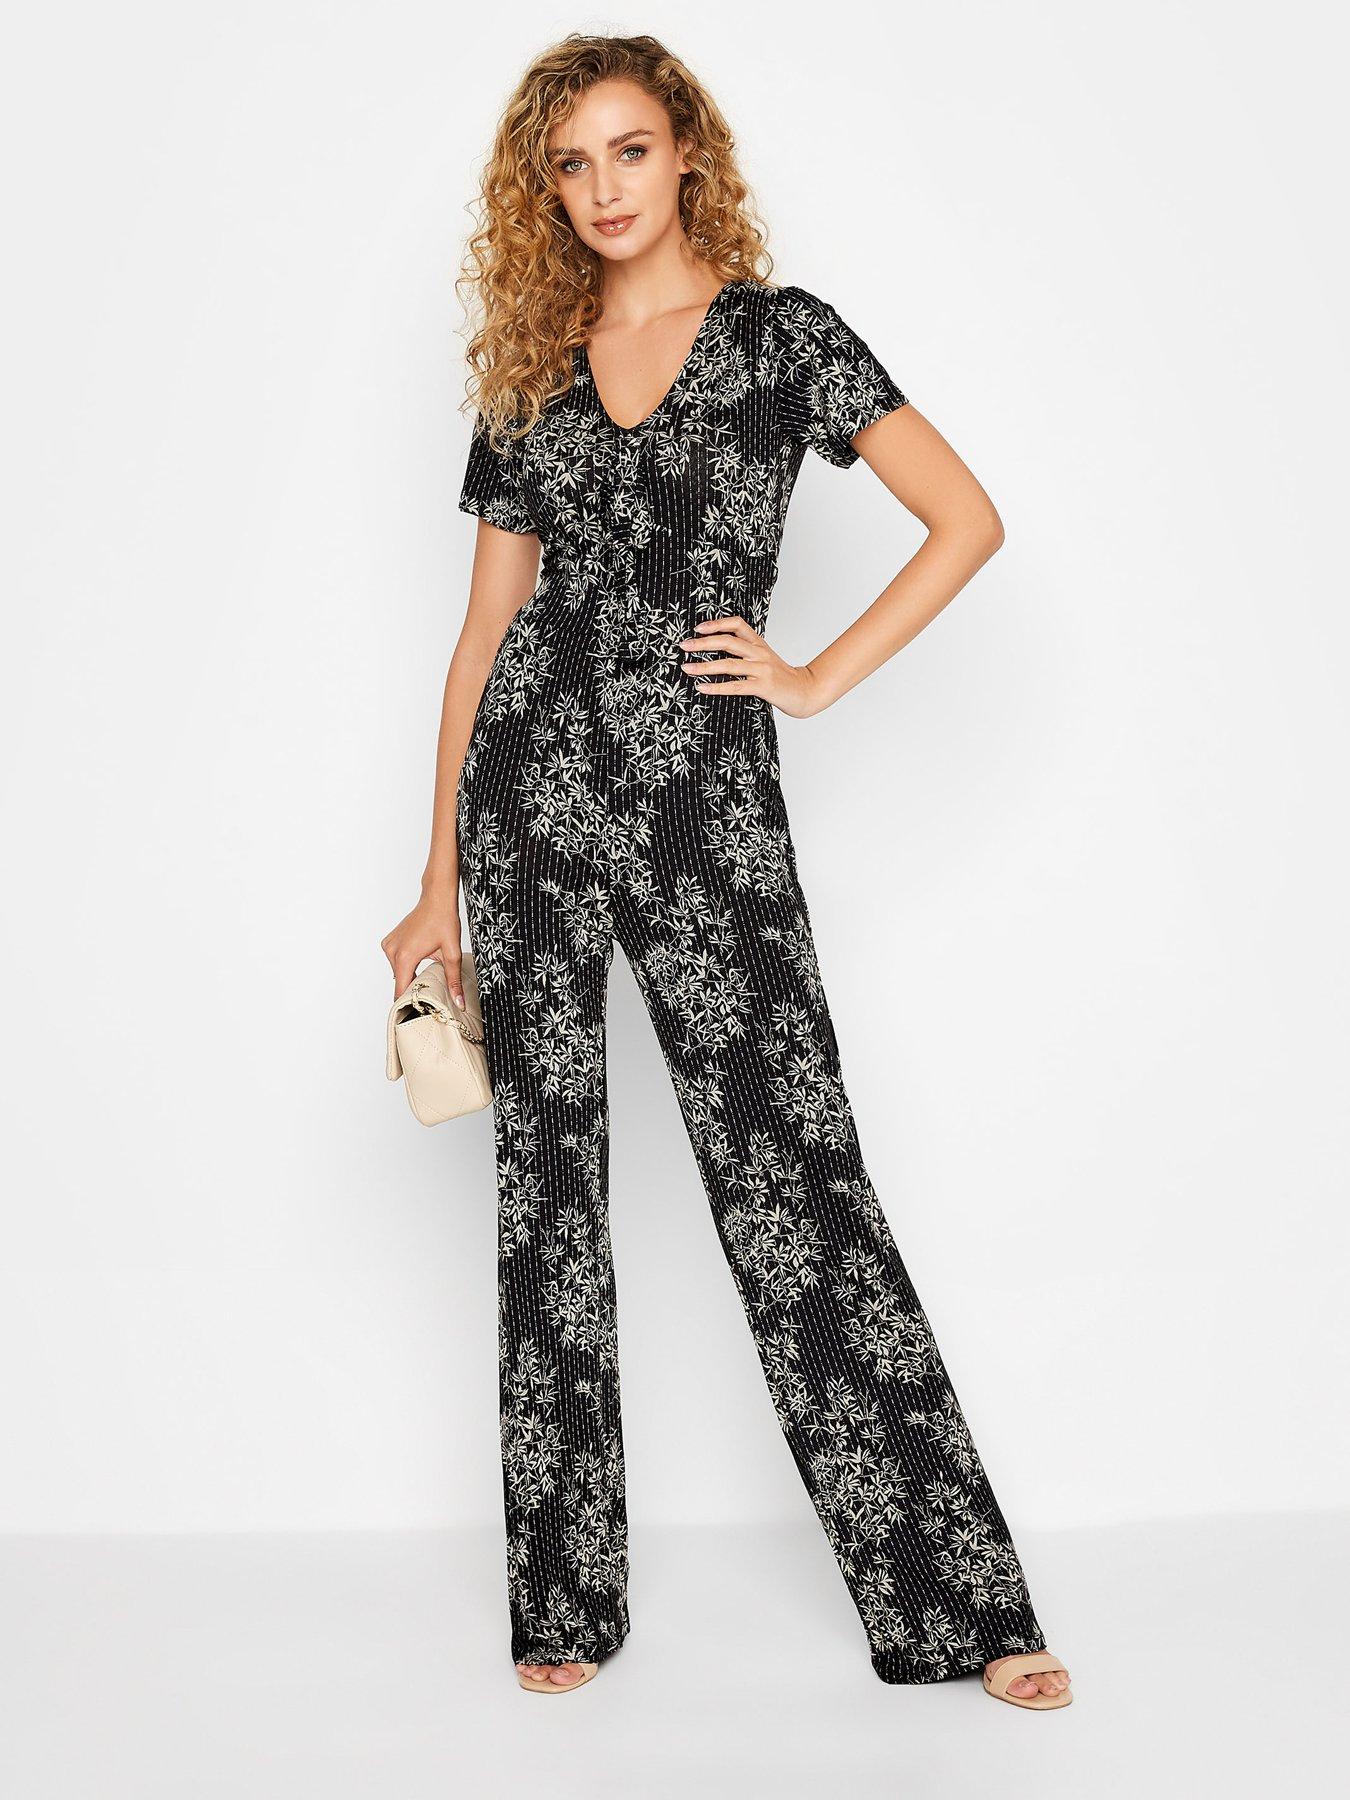 Long tall sally, Playsuits & jumpsuits, Women